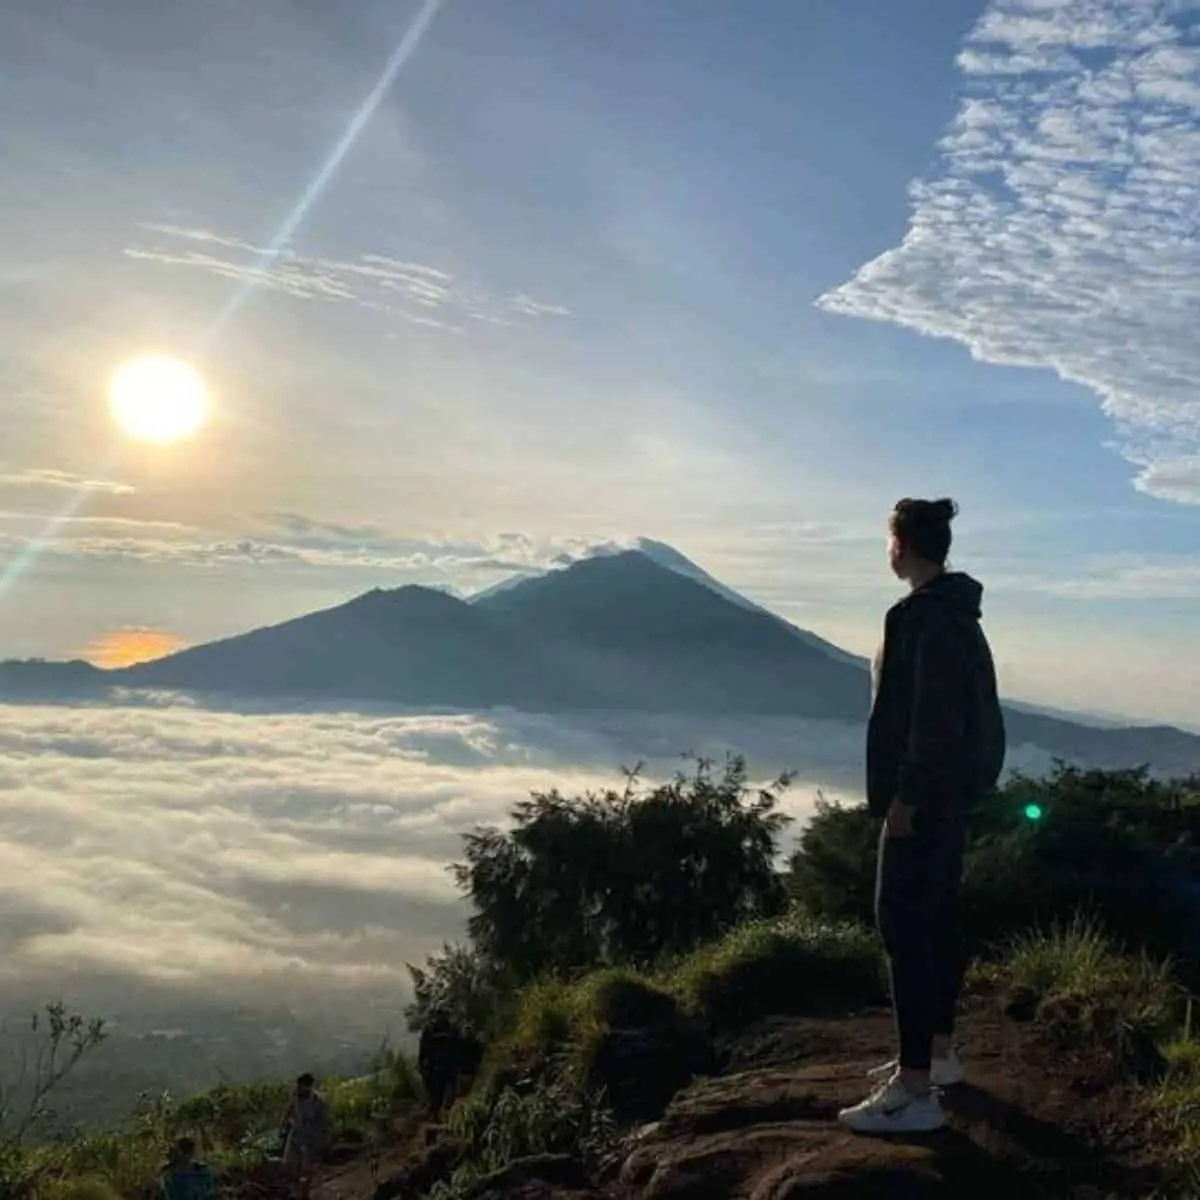 A lady enjoying the beautiful sunrise at Mount Batur above the sea of clouds